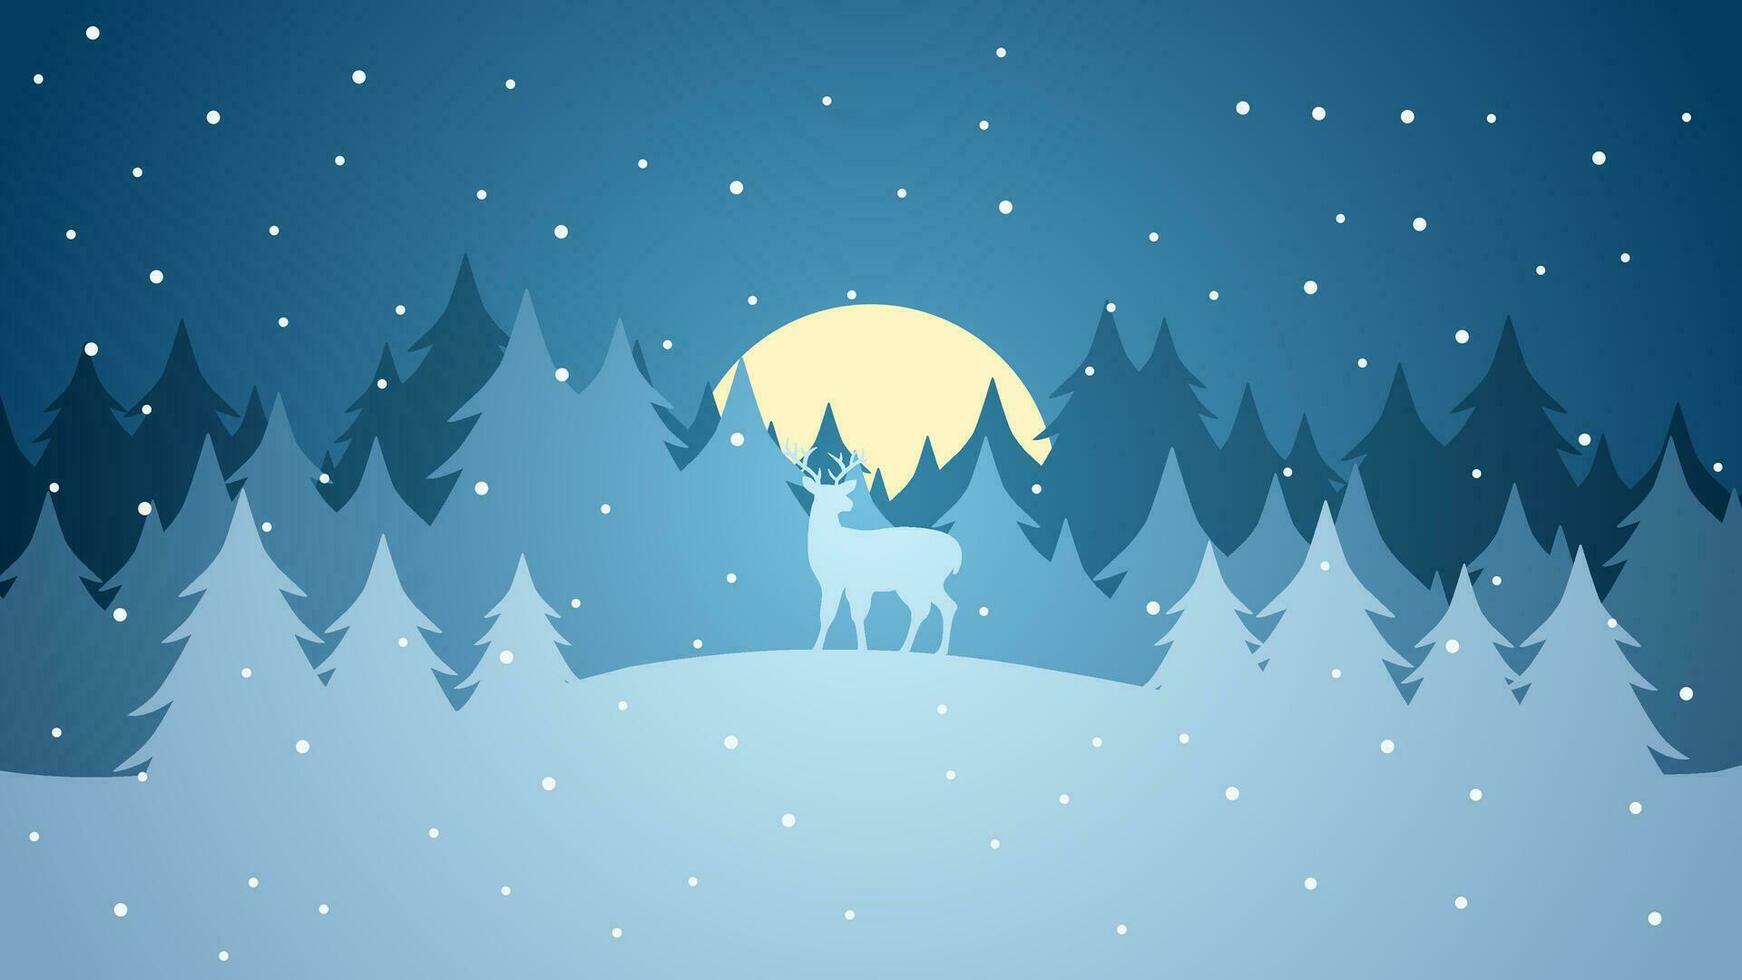 Winter season silhouette landscape vector illustration. Scenery of reindeer silhouette in the snow hill. Cold season panorama for illustration, background or wallpaper